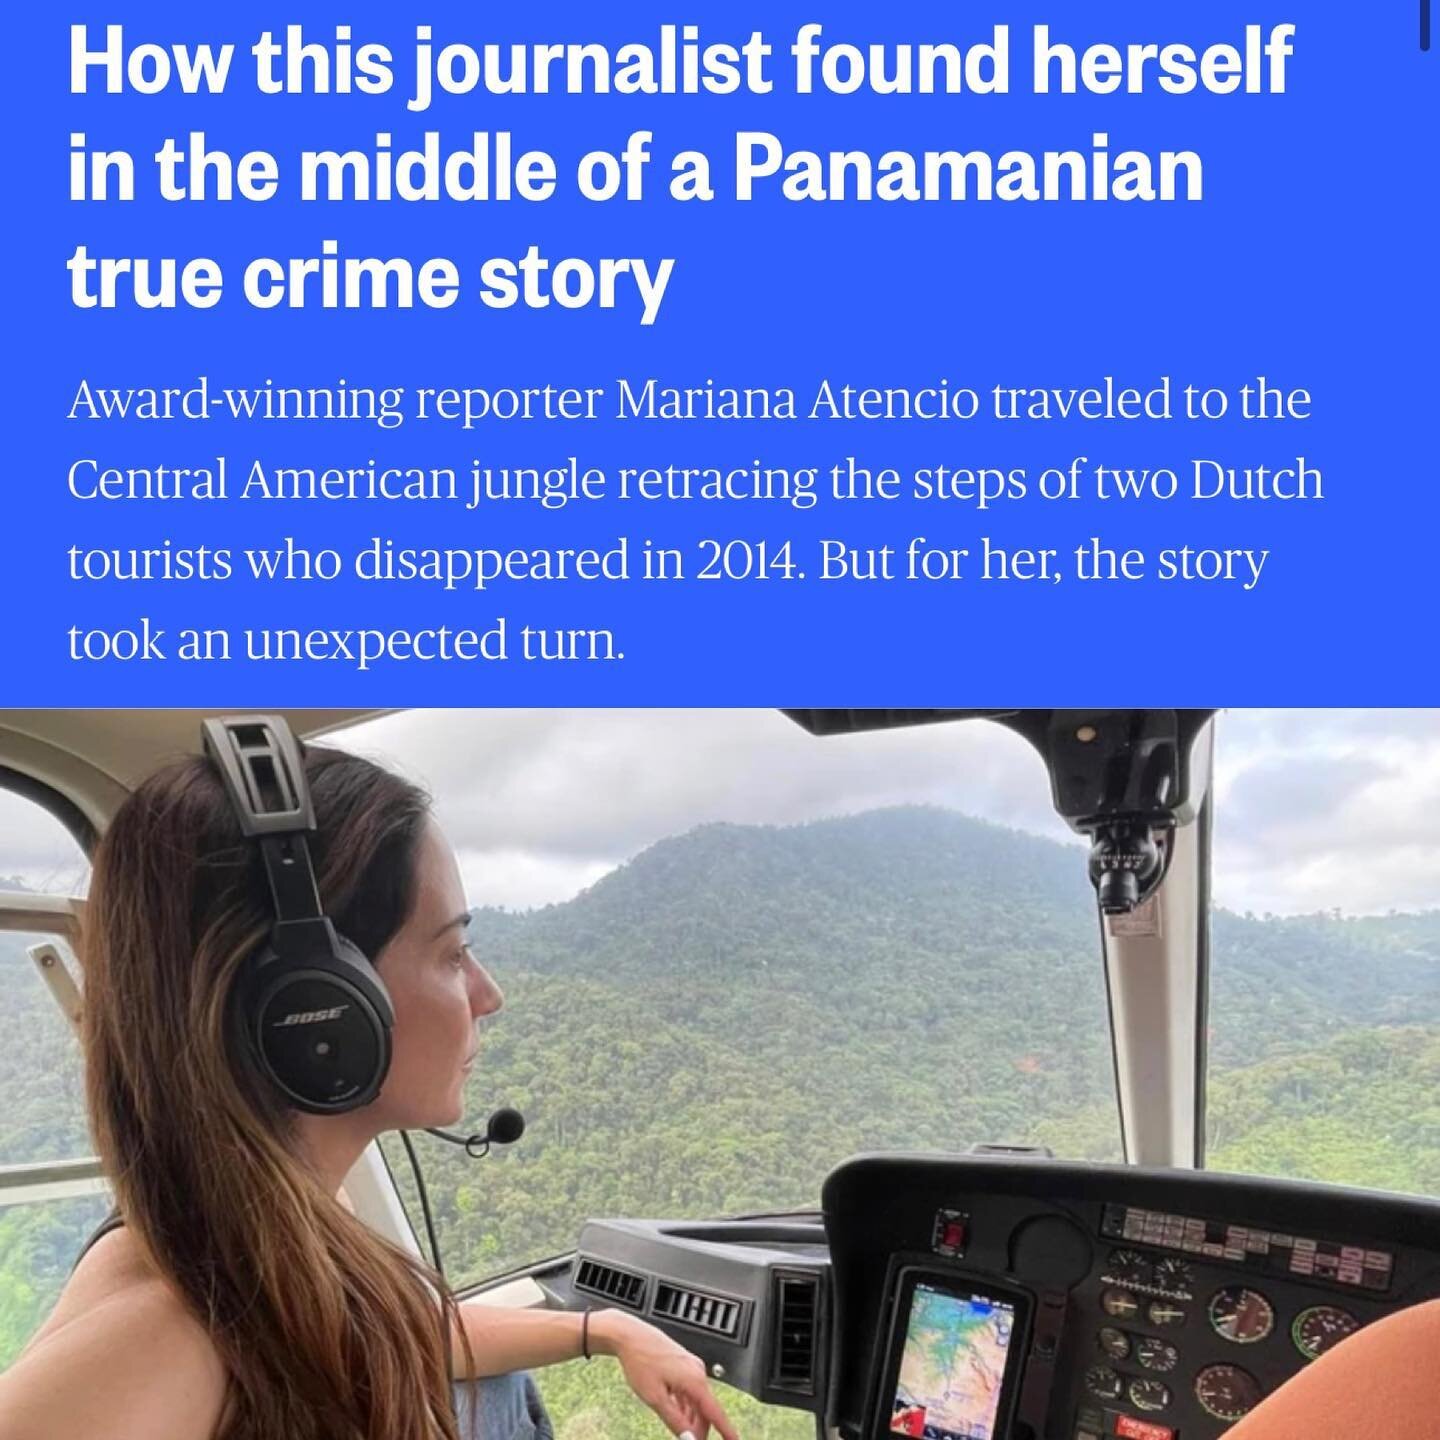 &ldquo;Lost Girl&rdquo;: How I found myself in the middle of a Panamanian true crime story. 

My priorities shifted during this investigation. I reconnected to the struggles of everyday people and got back to boots on-the-ground reporting in places f